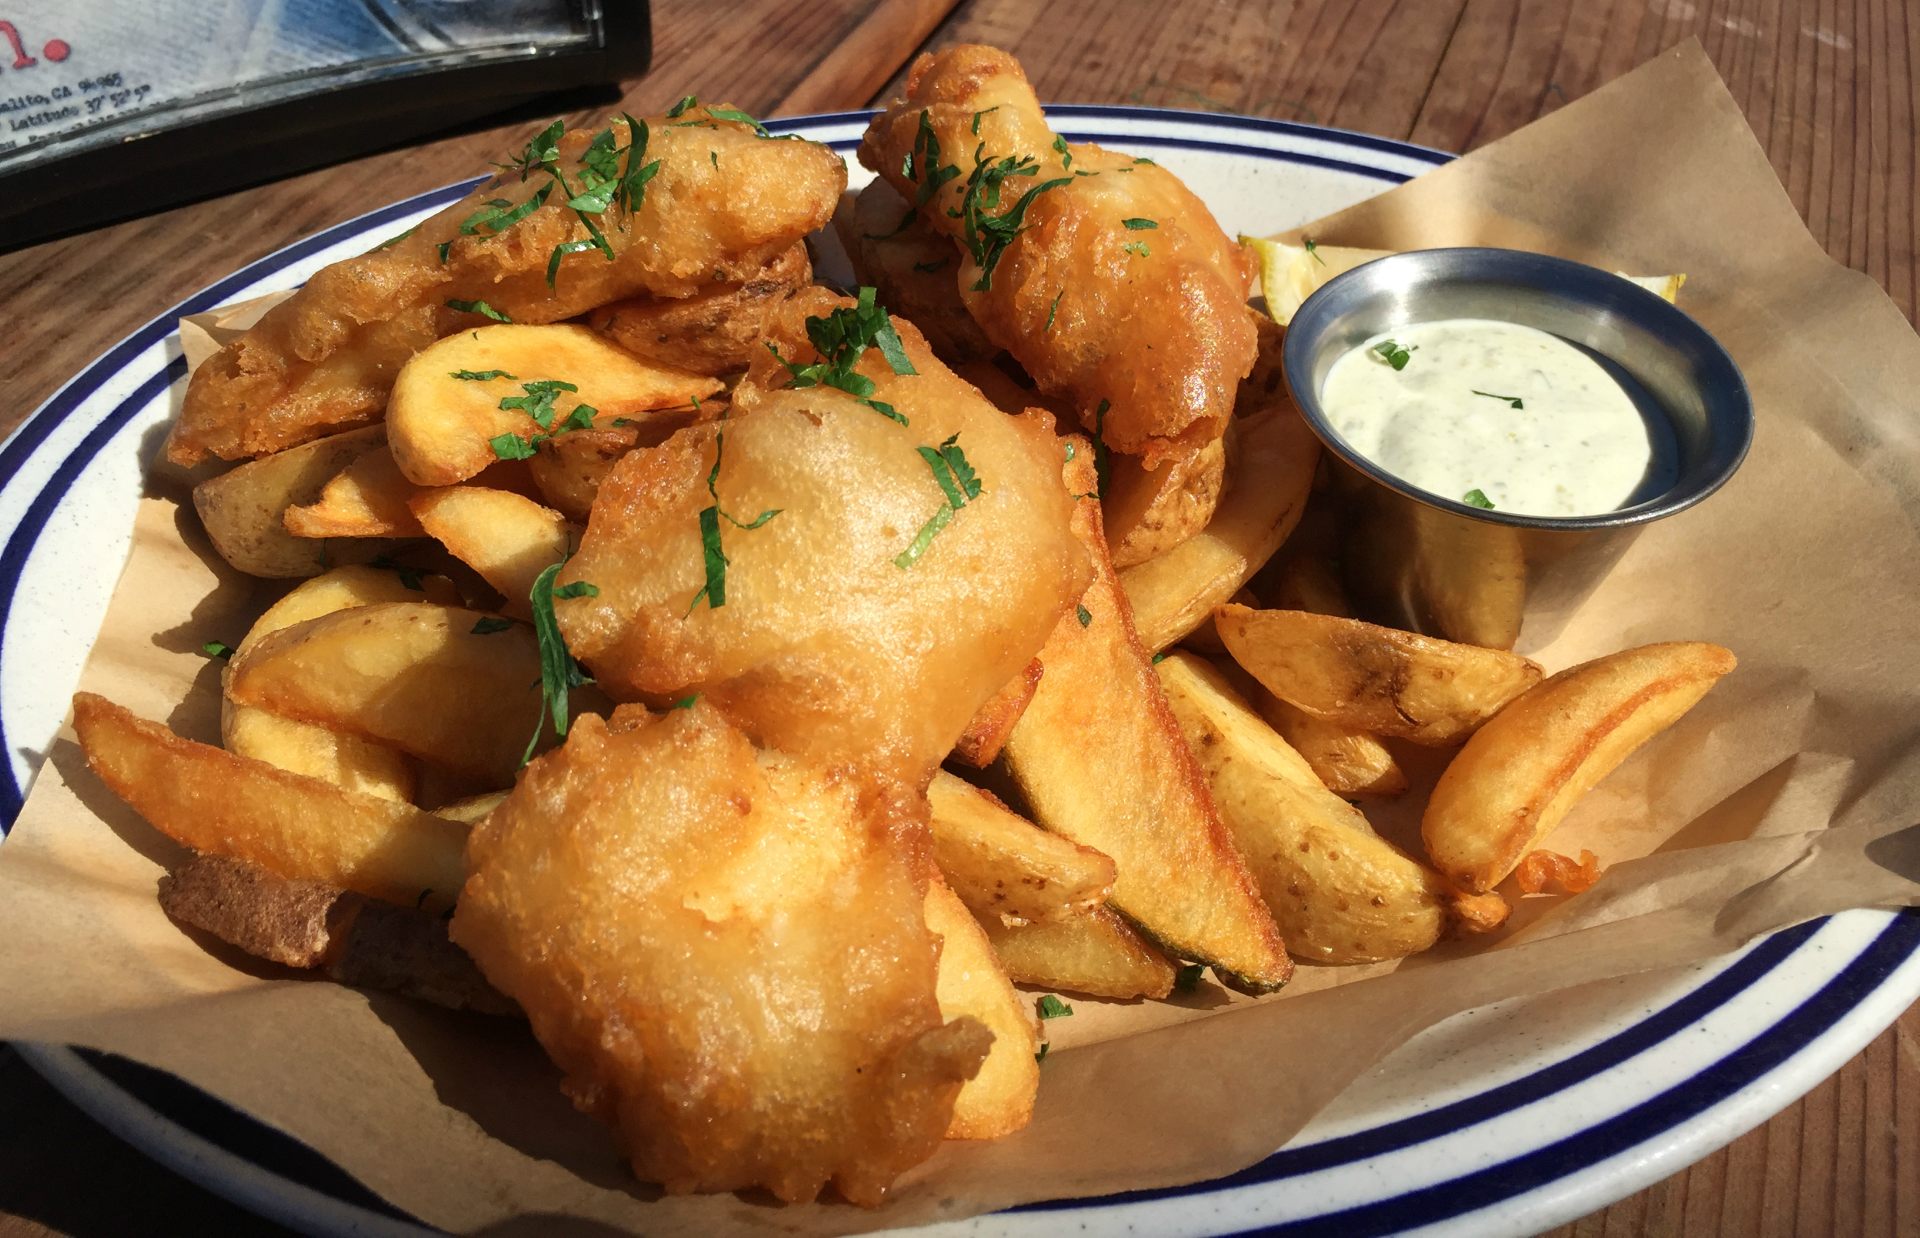 The fish and chips at Fish featured local cod.